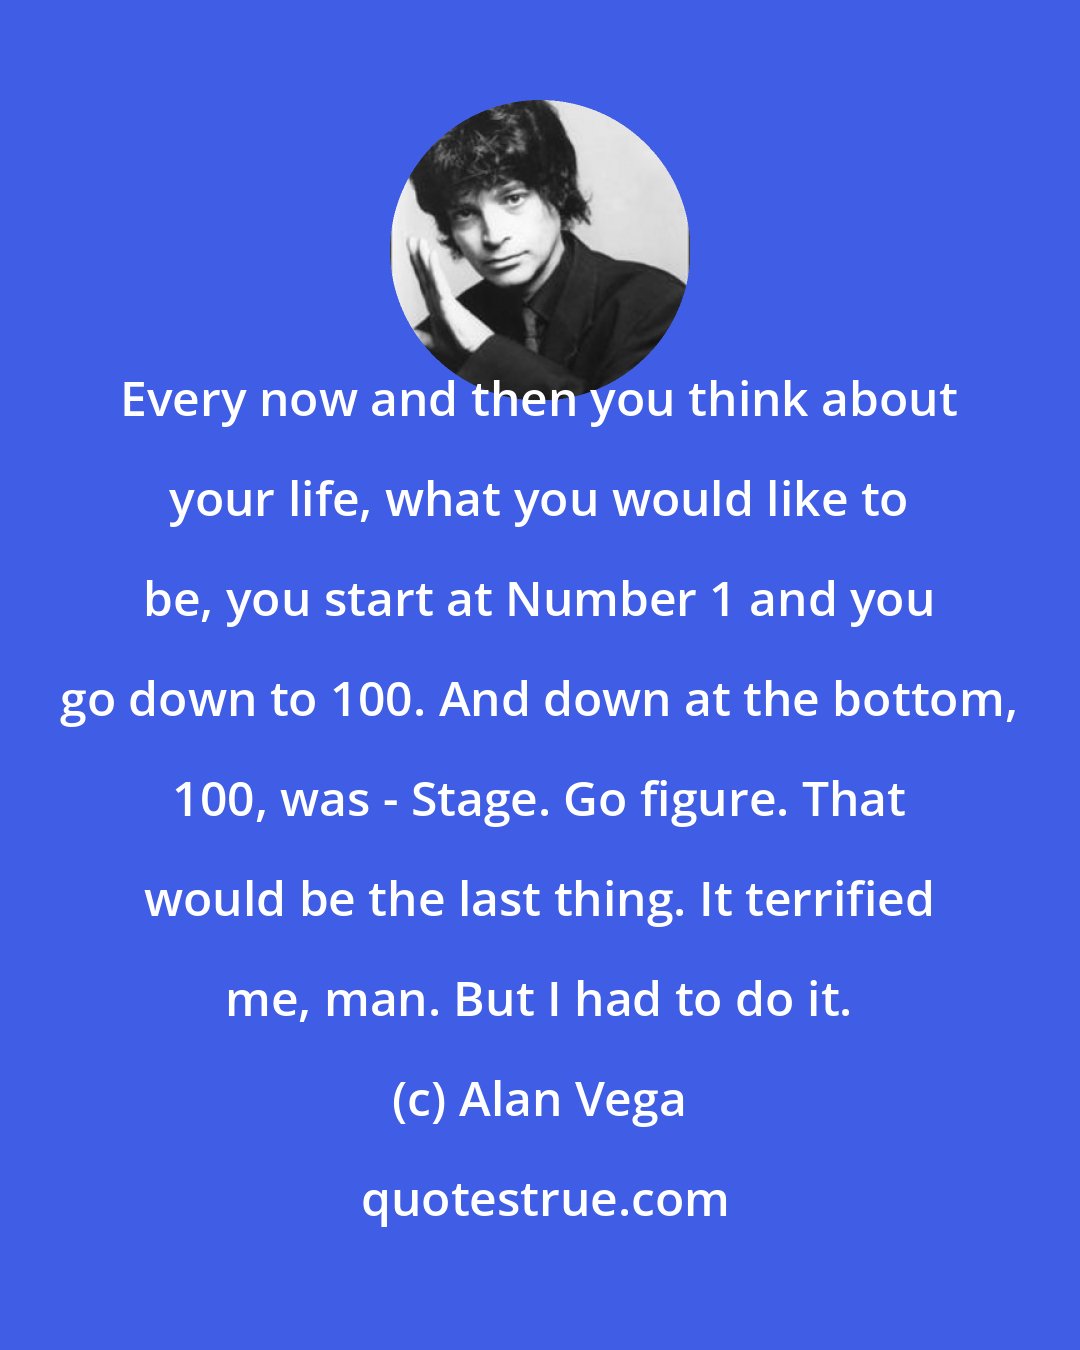 Alan Vega: Every now and then you think about your life, what you would like to be, you start at Number 1 and you go down to 100. And down at the bottom, 100, was - Stage. Go figure. That would be the last thing. It terrified me, man. But I had to do it.